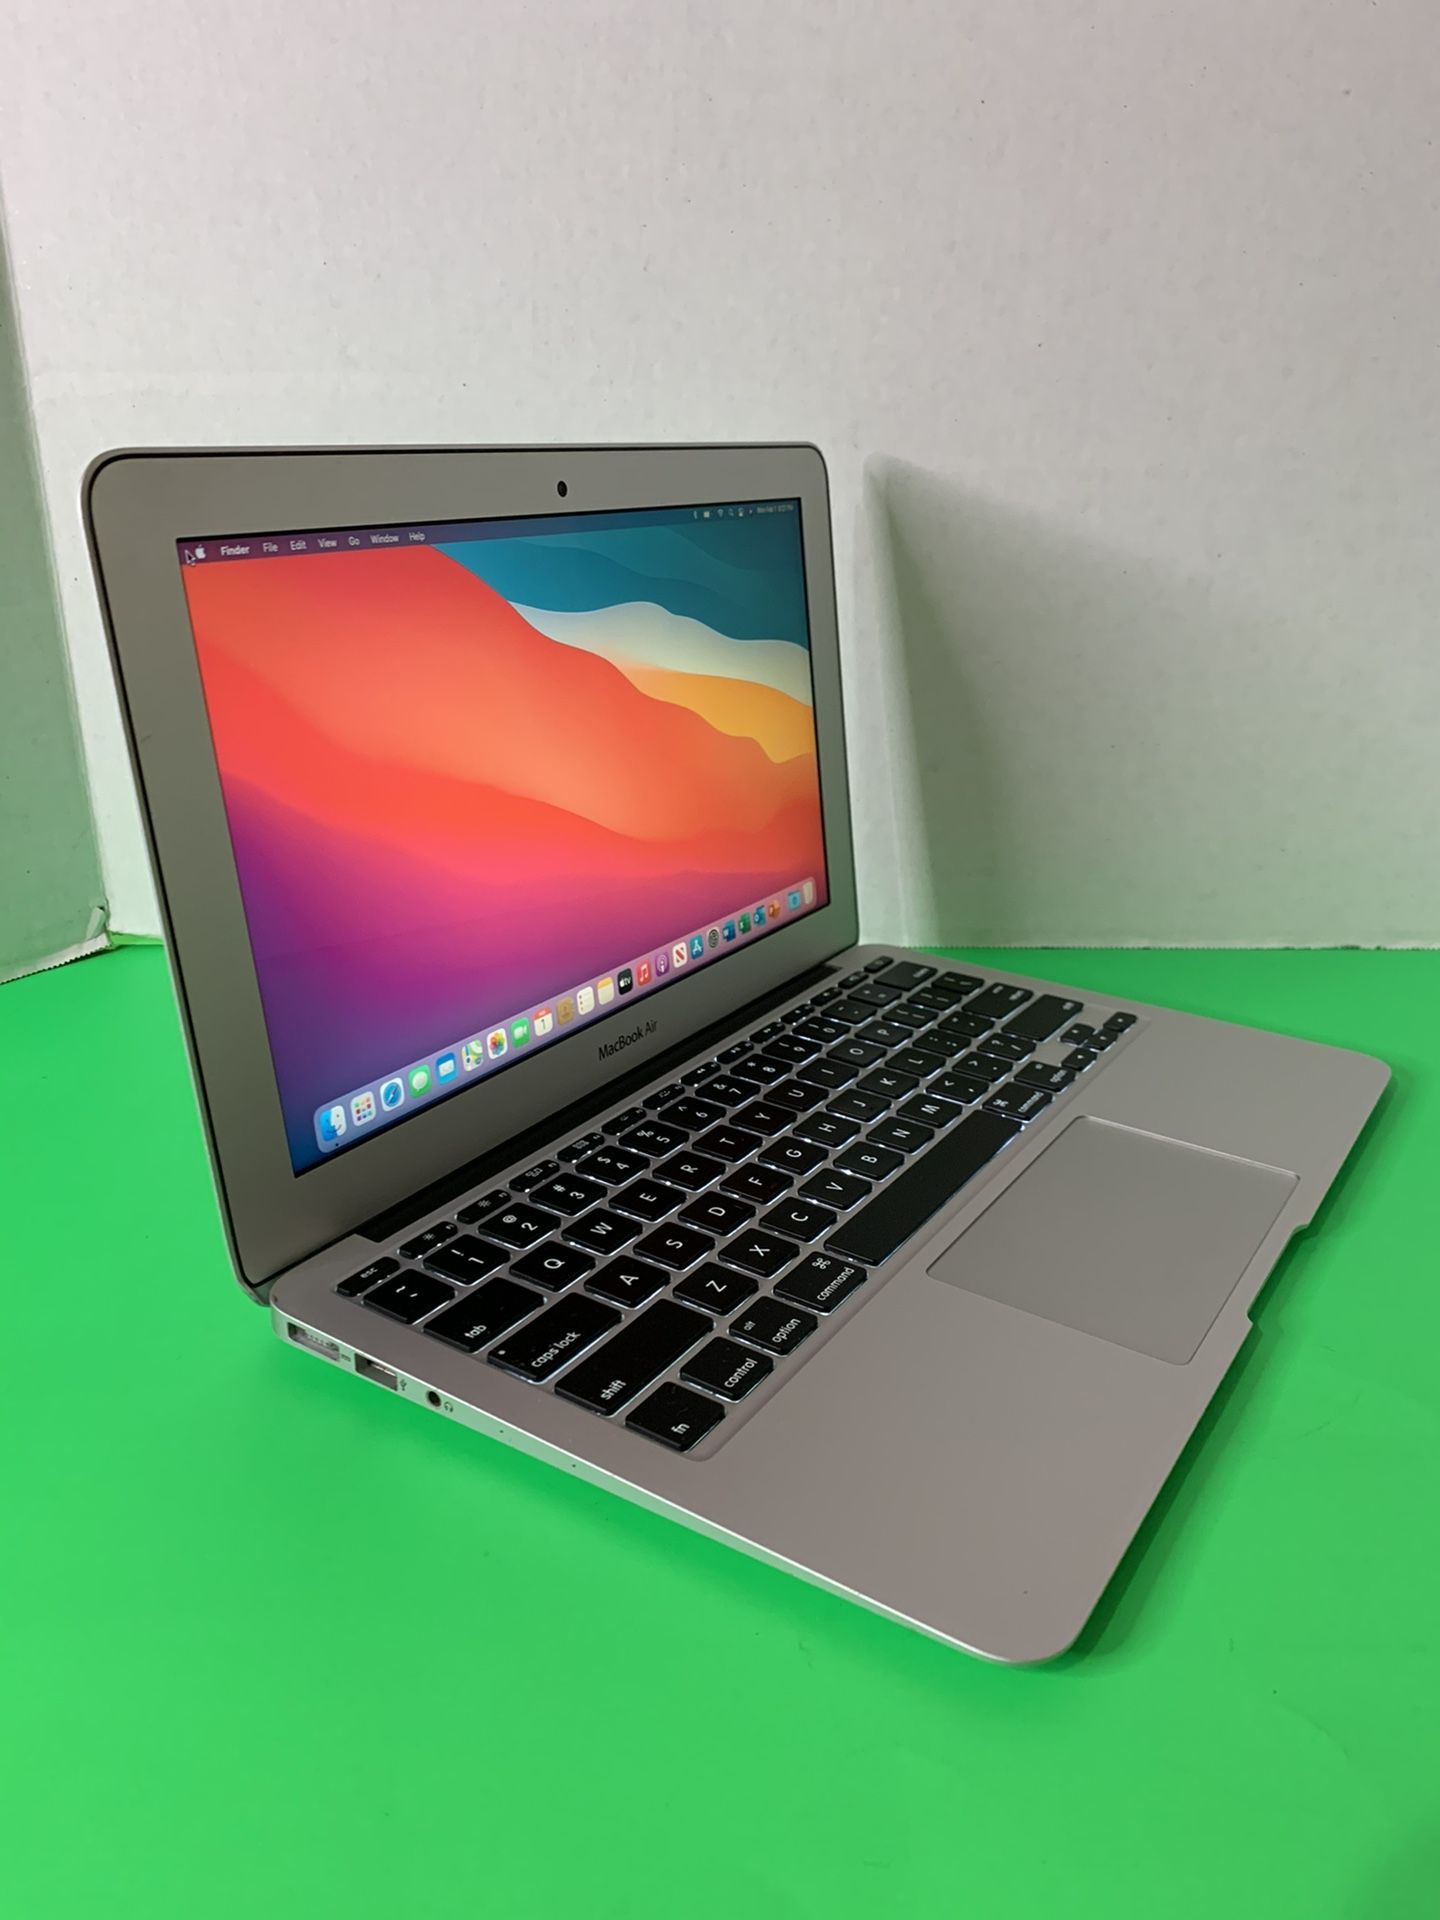 Macbook Air 2013 • Core i5 • 128SSD • 4GB • osX Big Sur • Microsoft Office 2019 • Excellent condition